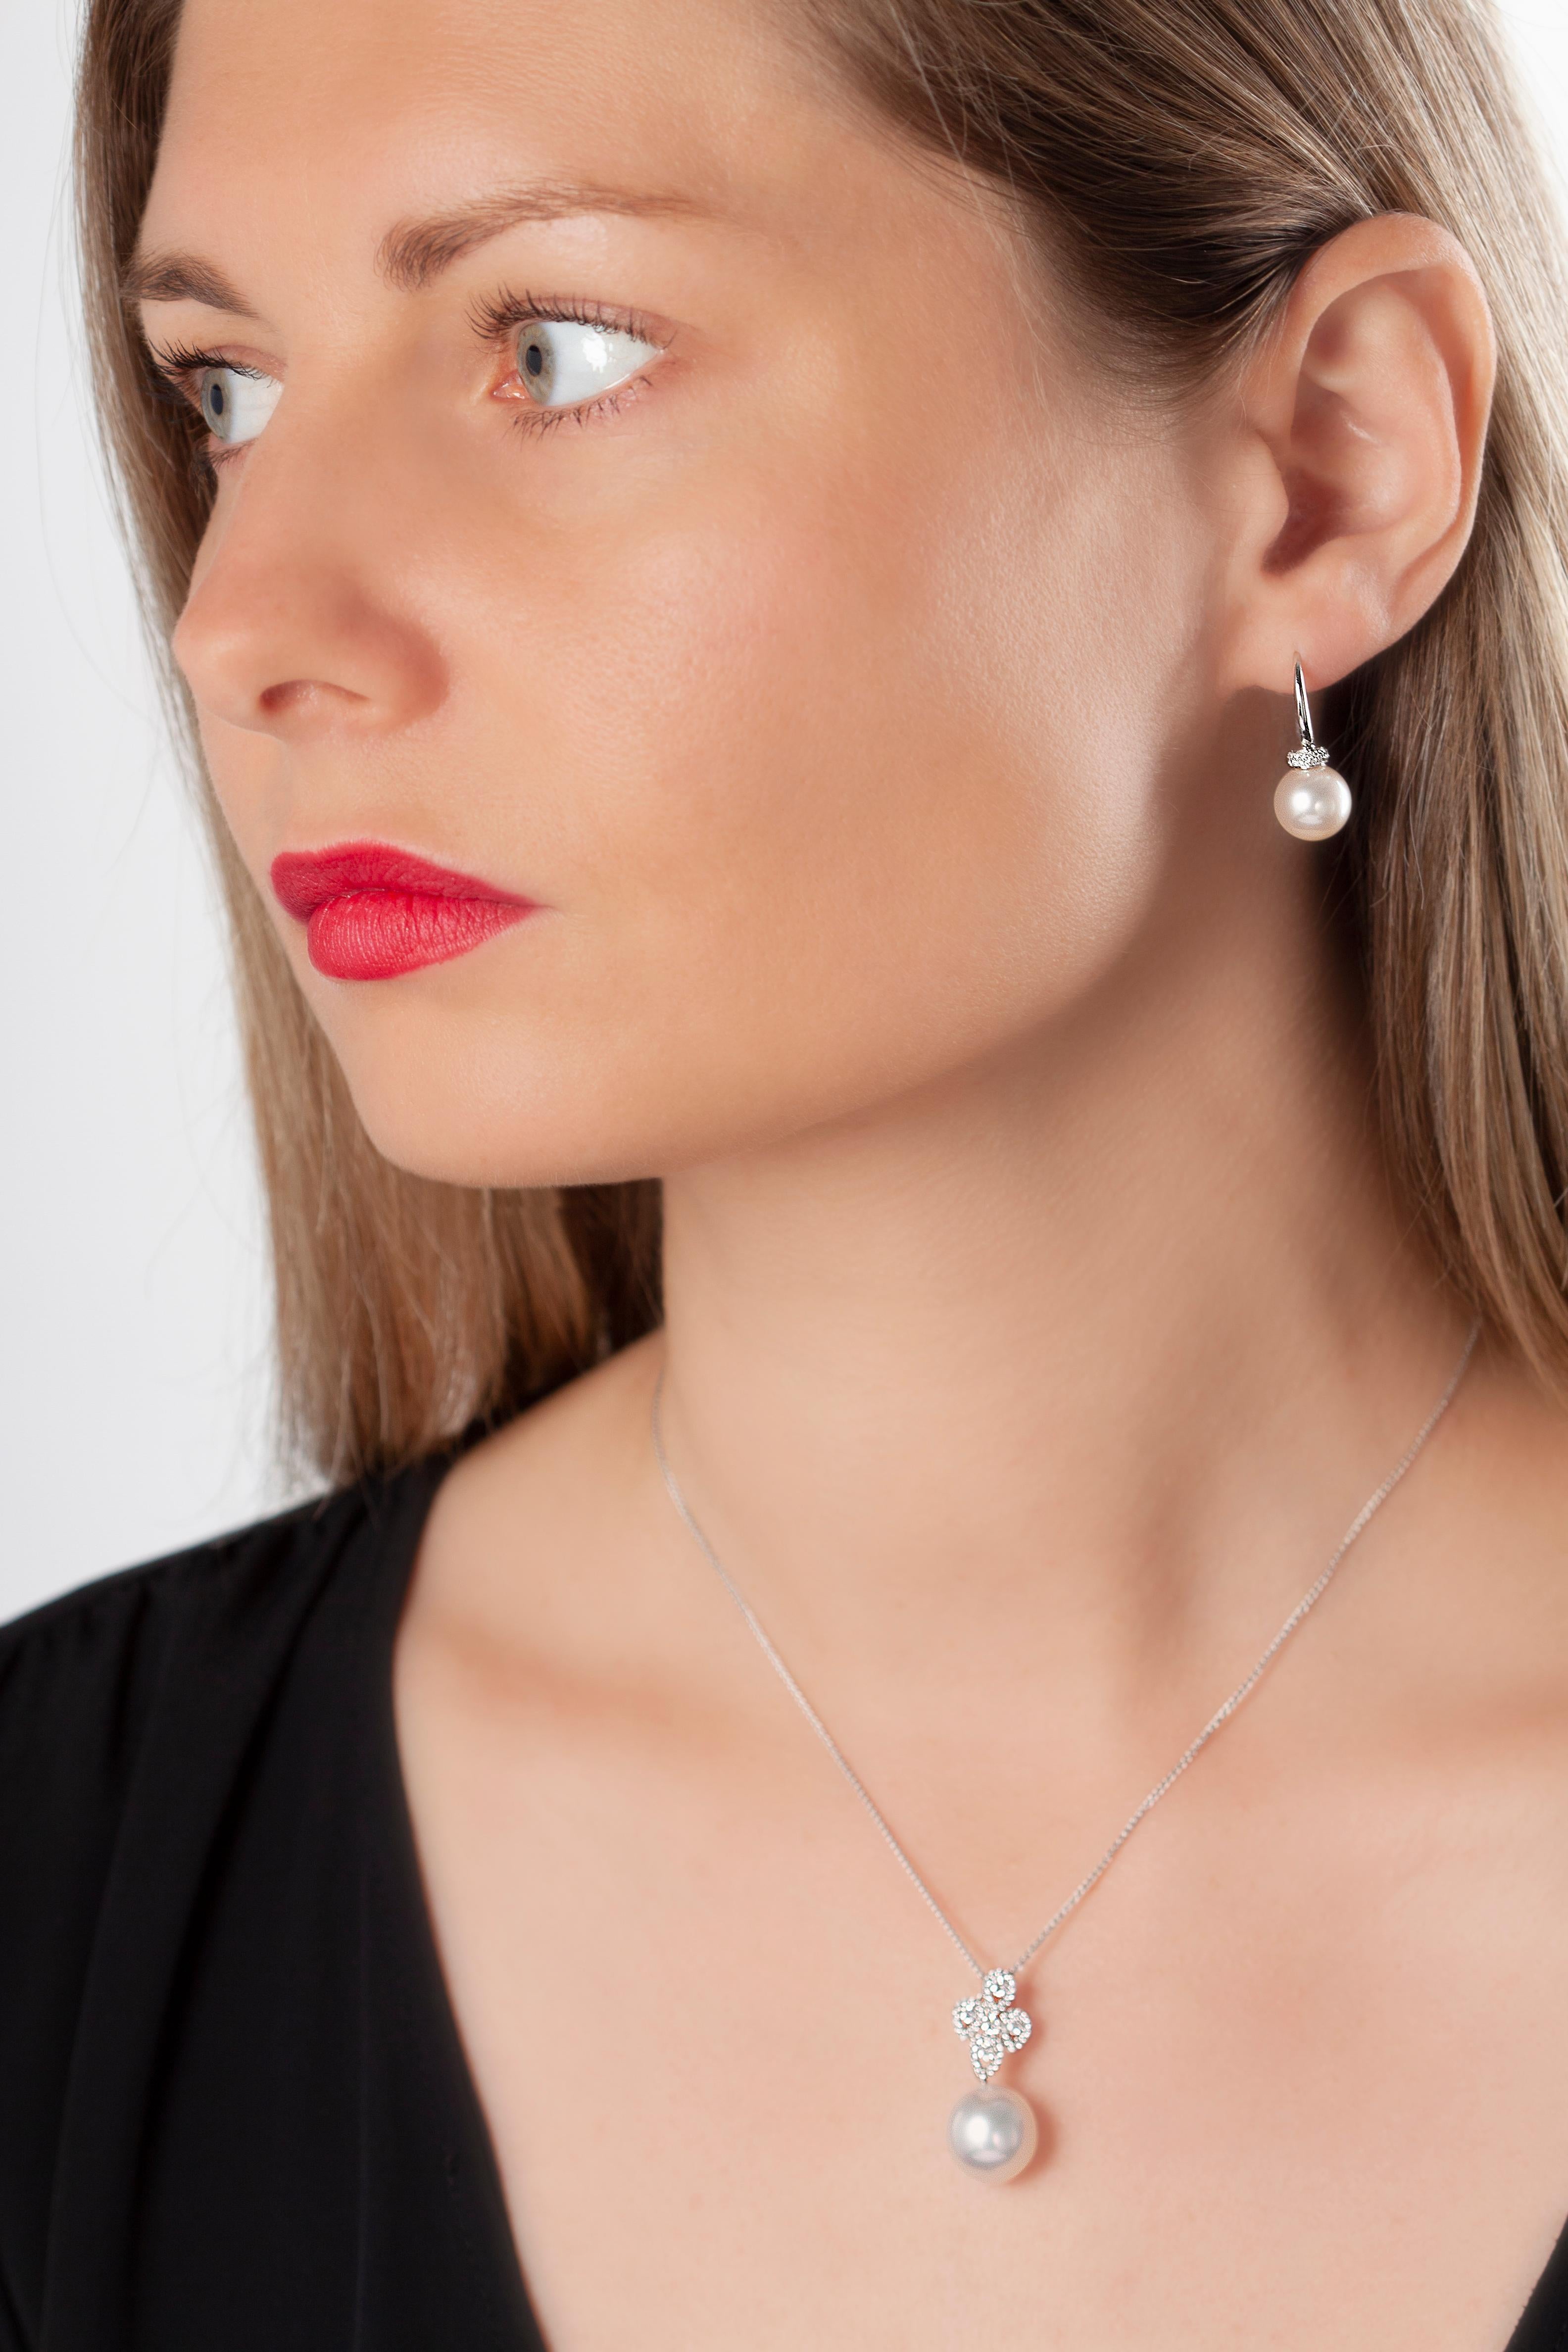 This sophisticated pendant by Yoko London features a lustrous South Sea pearl beneath a scintallating arrangement of diamonds. This enchanting pendant will add a touch of elegance to both daytime and evening looks.  
-	12-13mm South Sea Pearl 
-	5